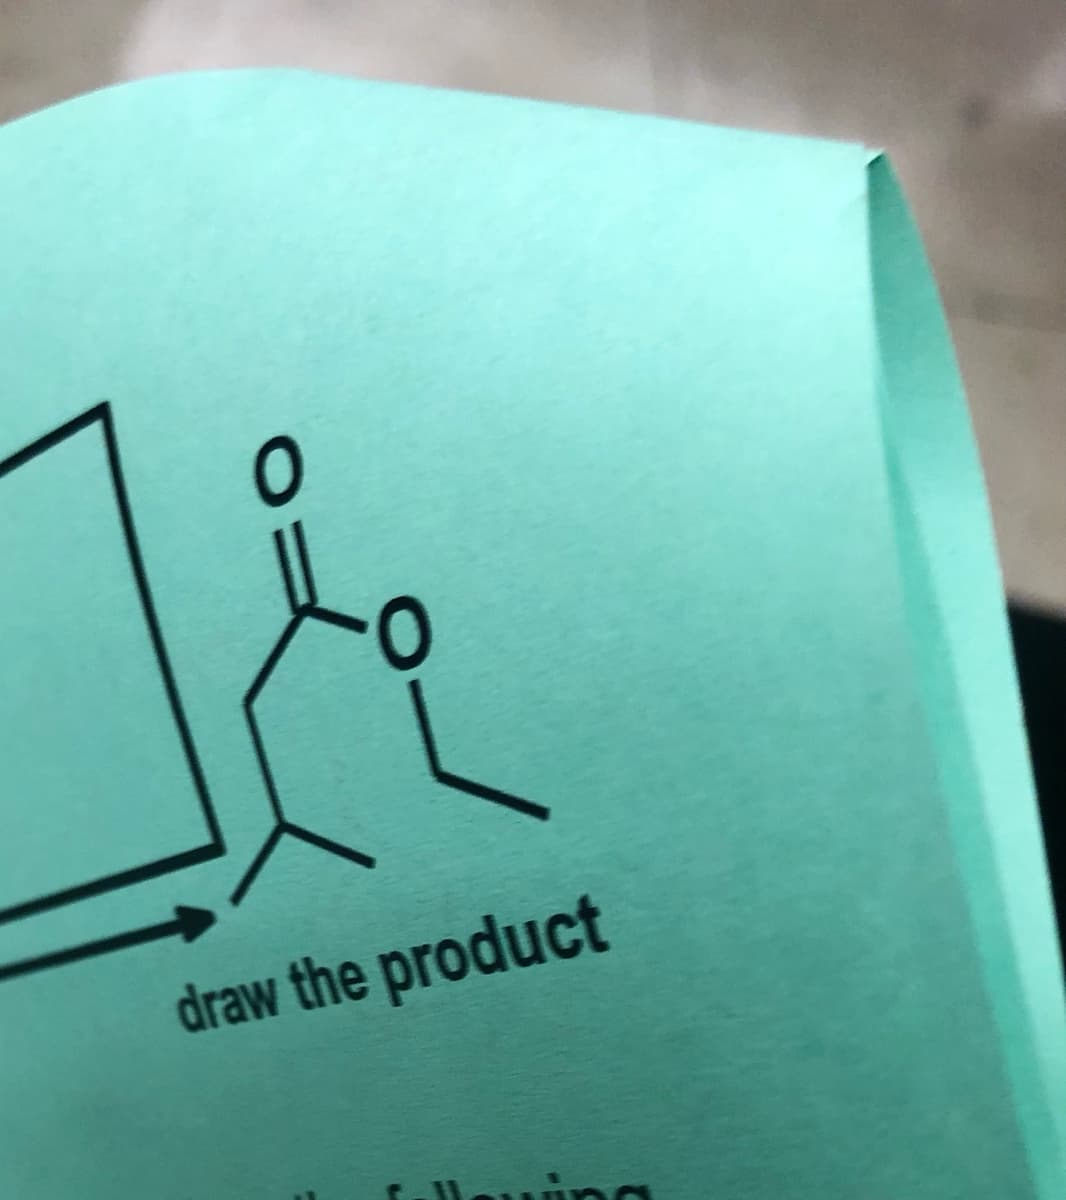 draw the product
